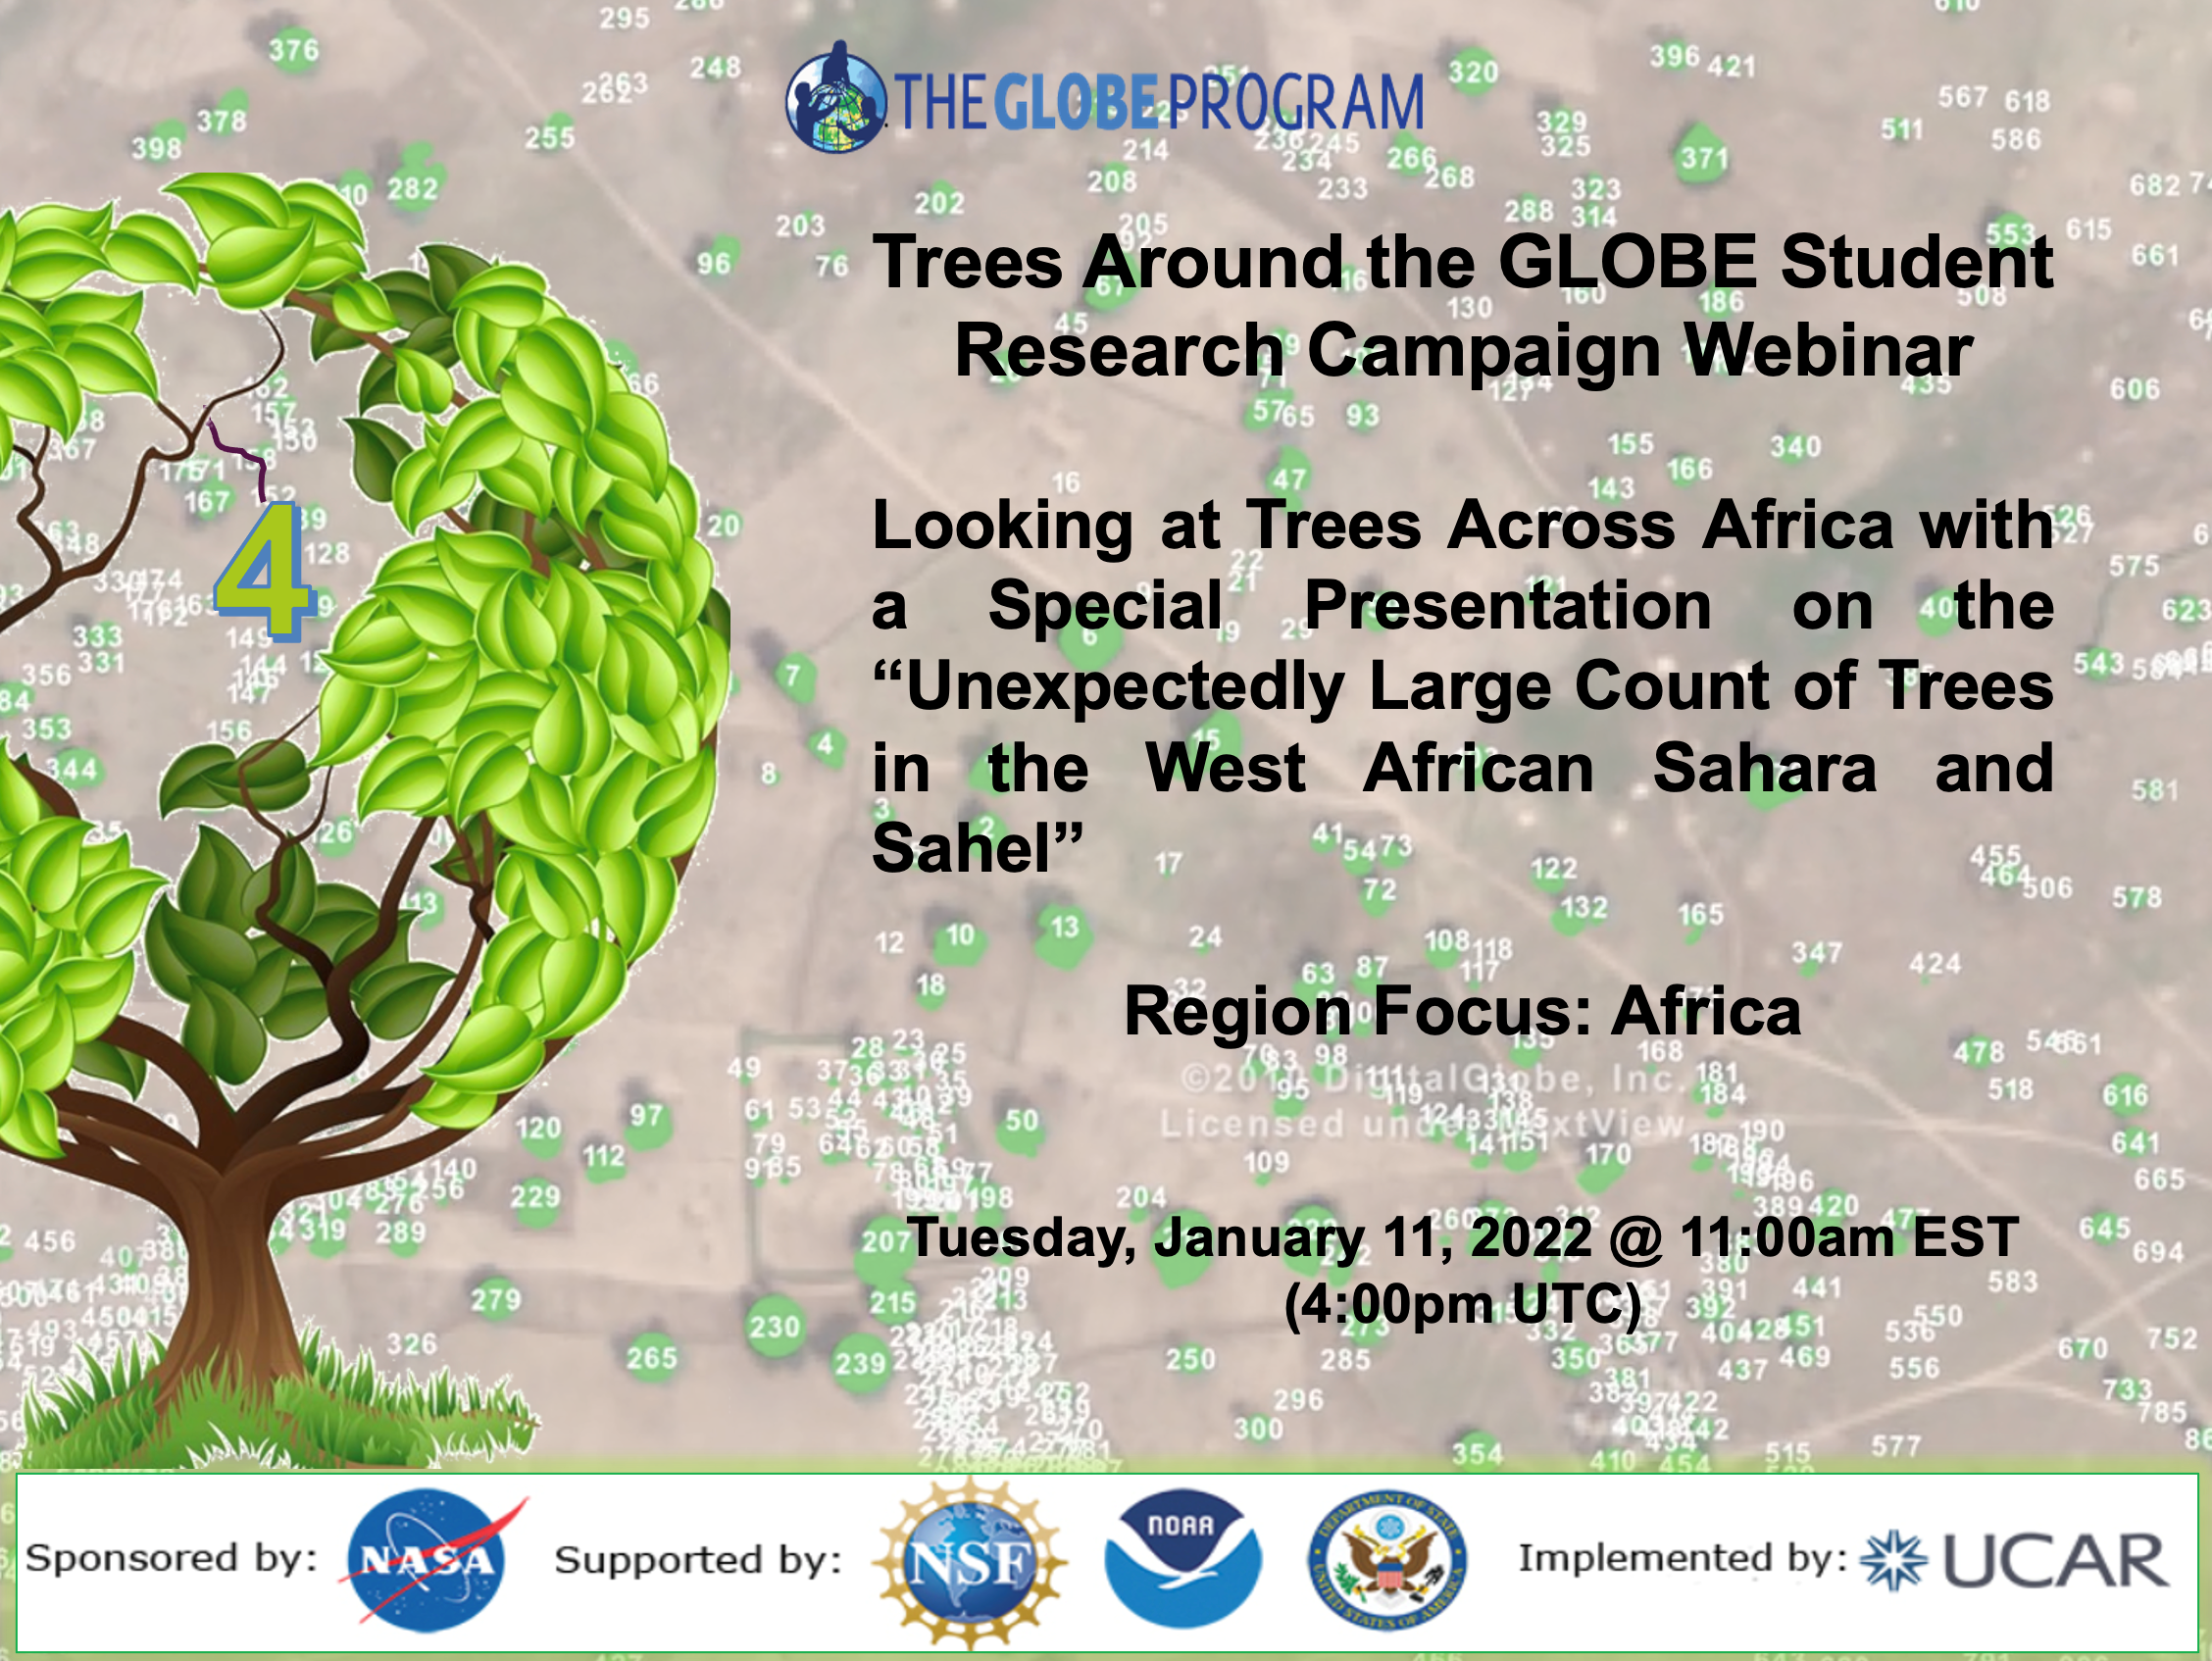 Trees Around the GLOBE 11 January 2022 webinar shareable, showing a tree and displaying the title, time, and date of the webinar